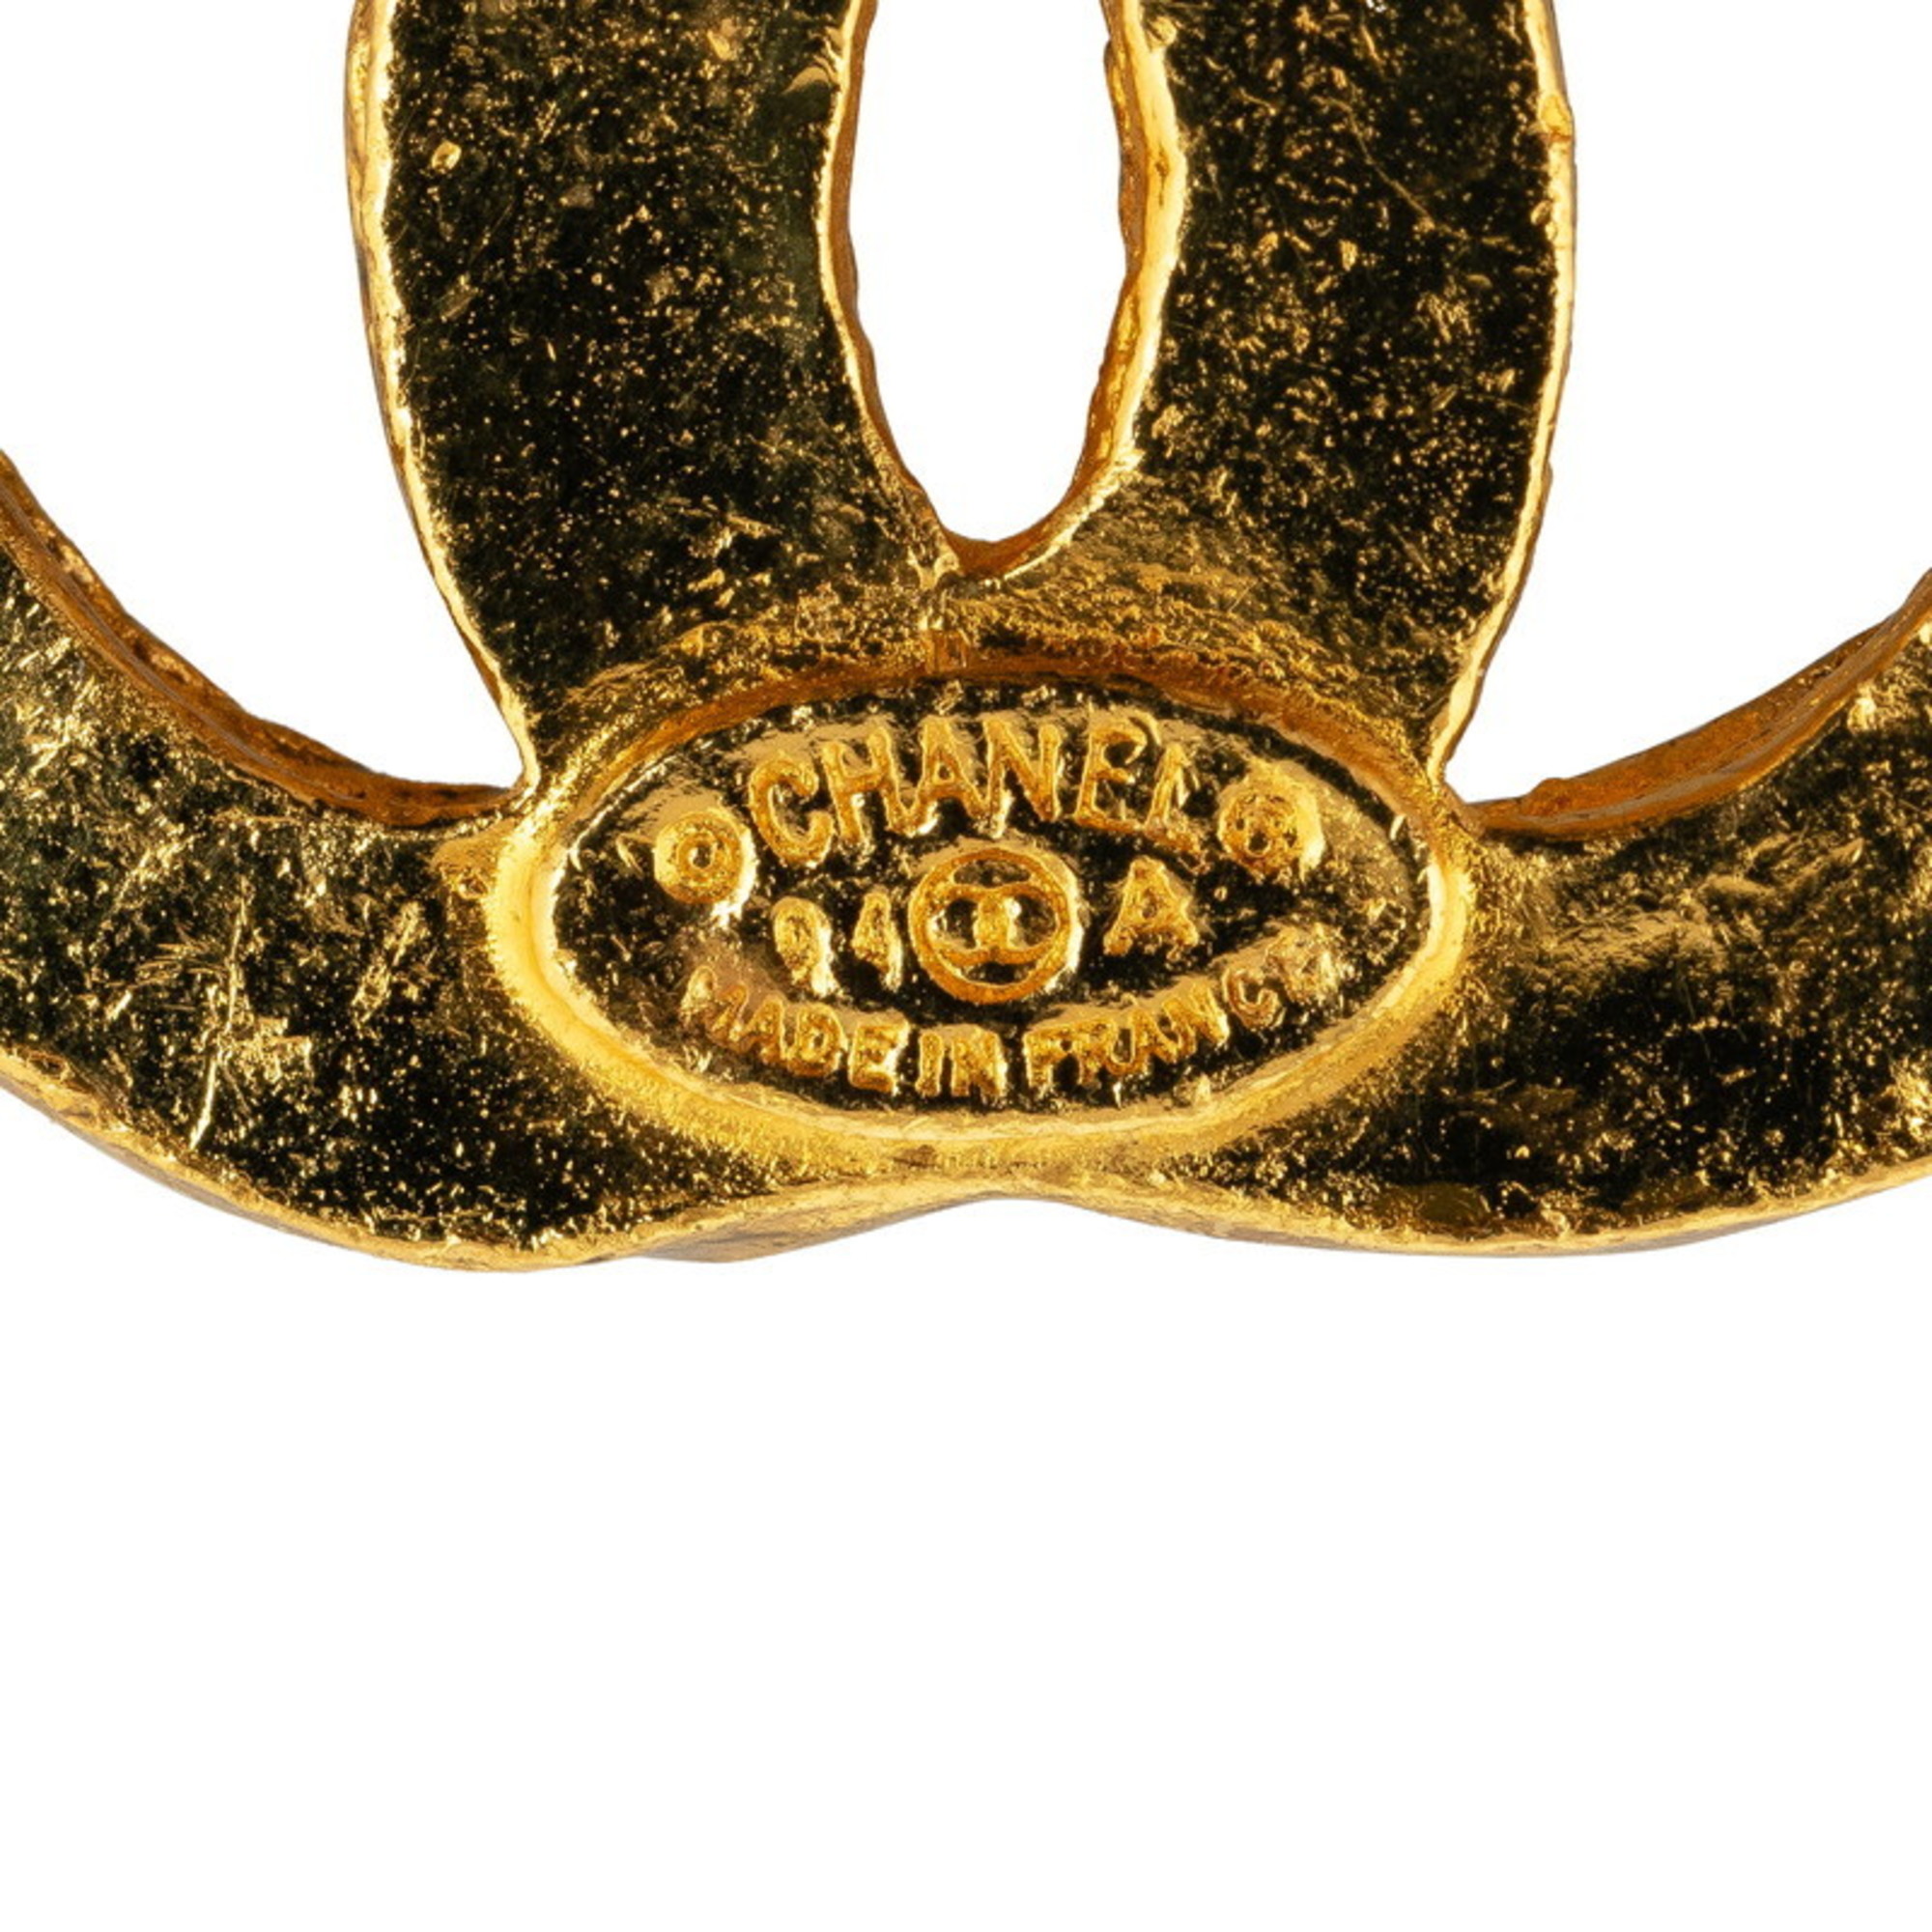 Chanel Coco Mark Triple Brooch Gold Plated Women's CHANEL